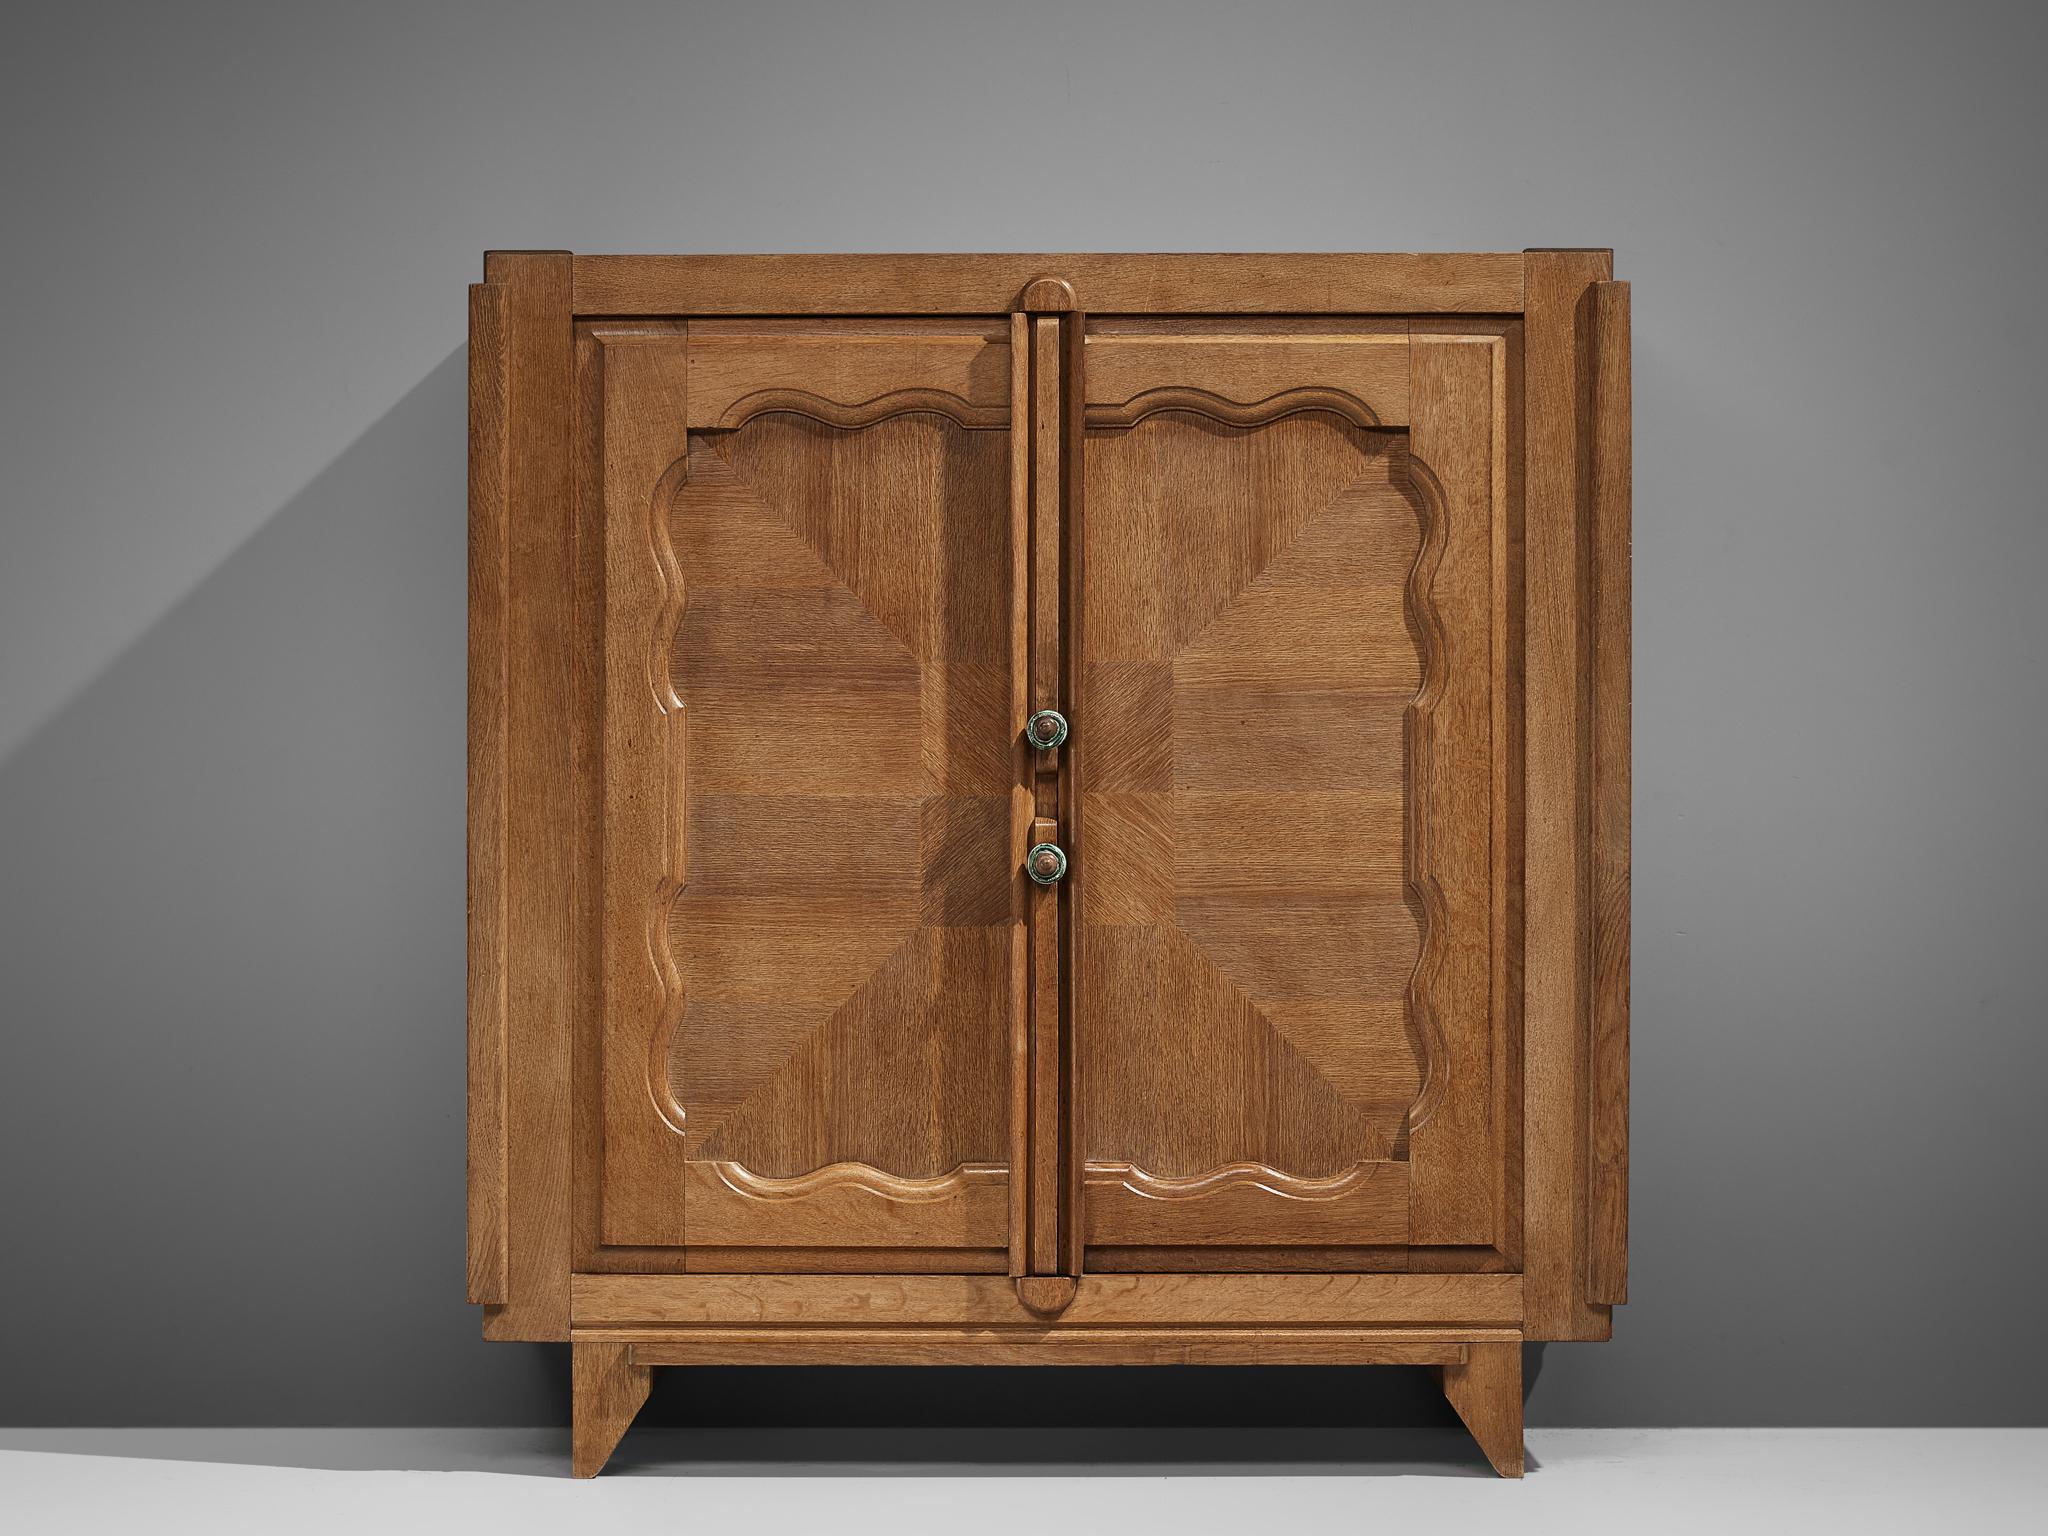 Guillerme and Chambron for Votre Maison, 'Bouviene' cabinet, oak, France, circa 1970.

This case piece is designed by Guillerme and Chambron and features geometric inlays in the doors. The cabinet offers plenty of storage, with a large compartment